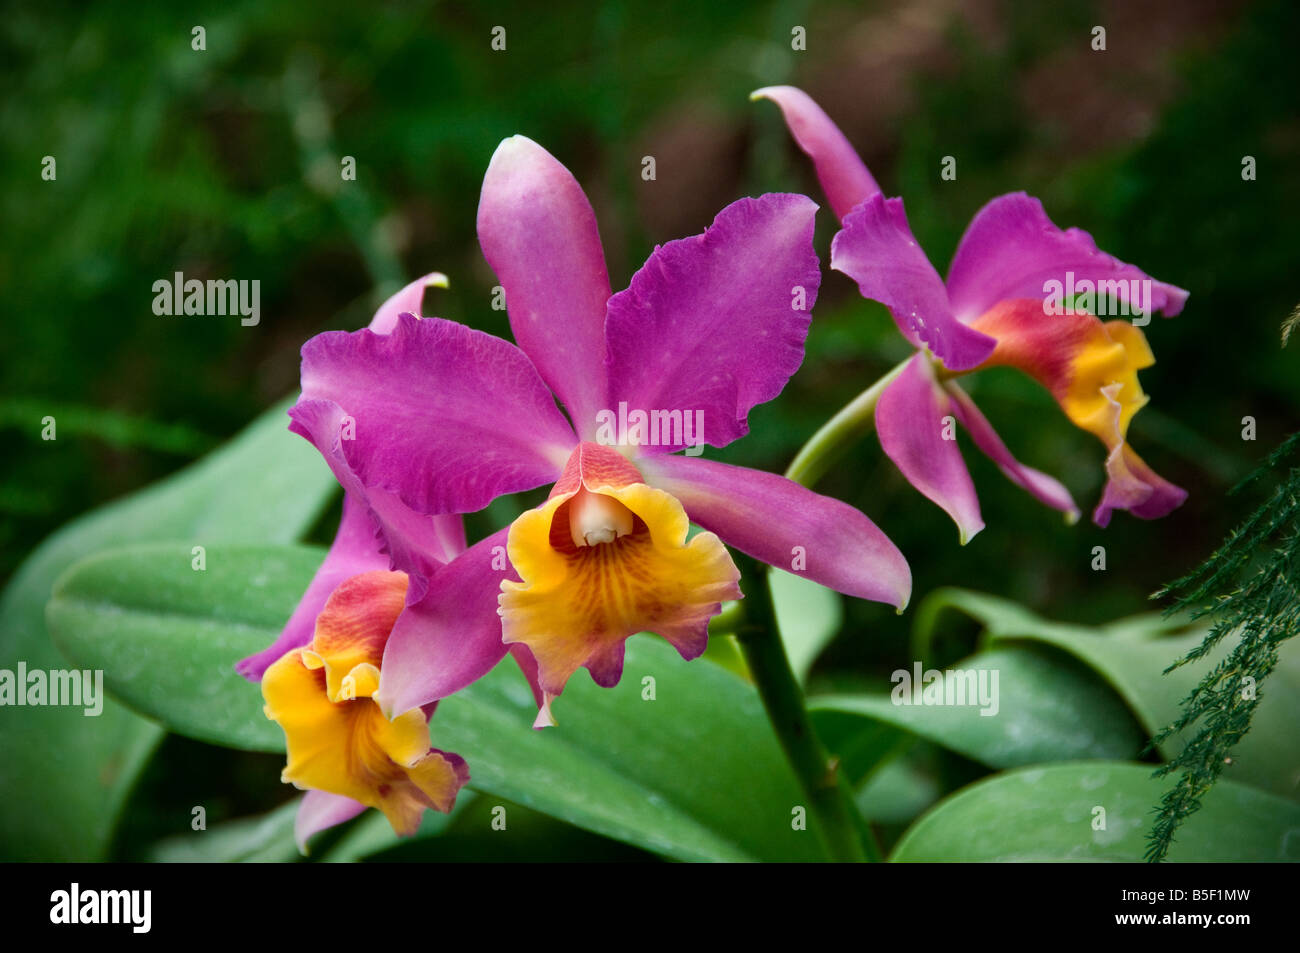 Phalaenopsis orchid flowers blooms in lush natural habitat Stock Photo